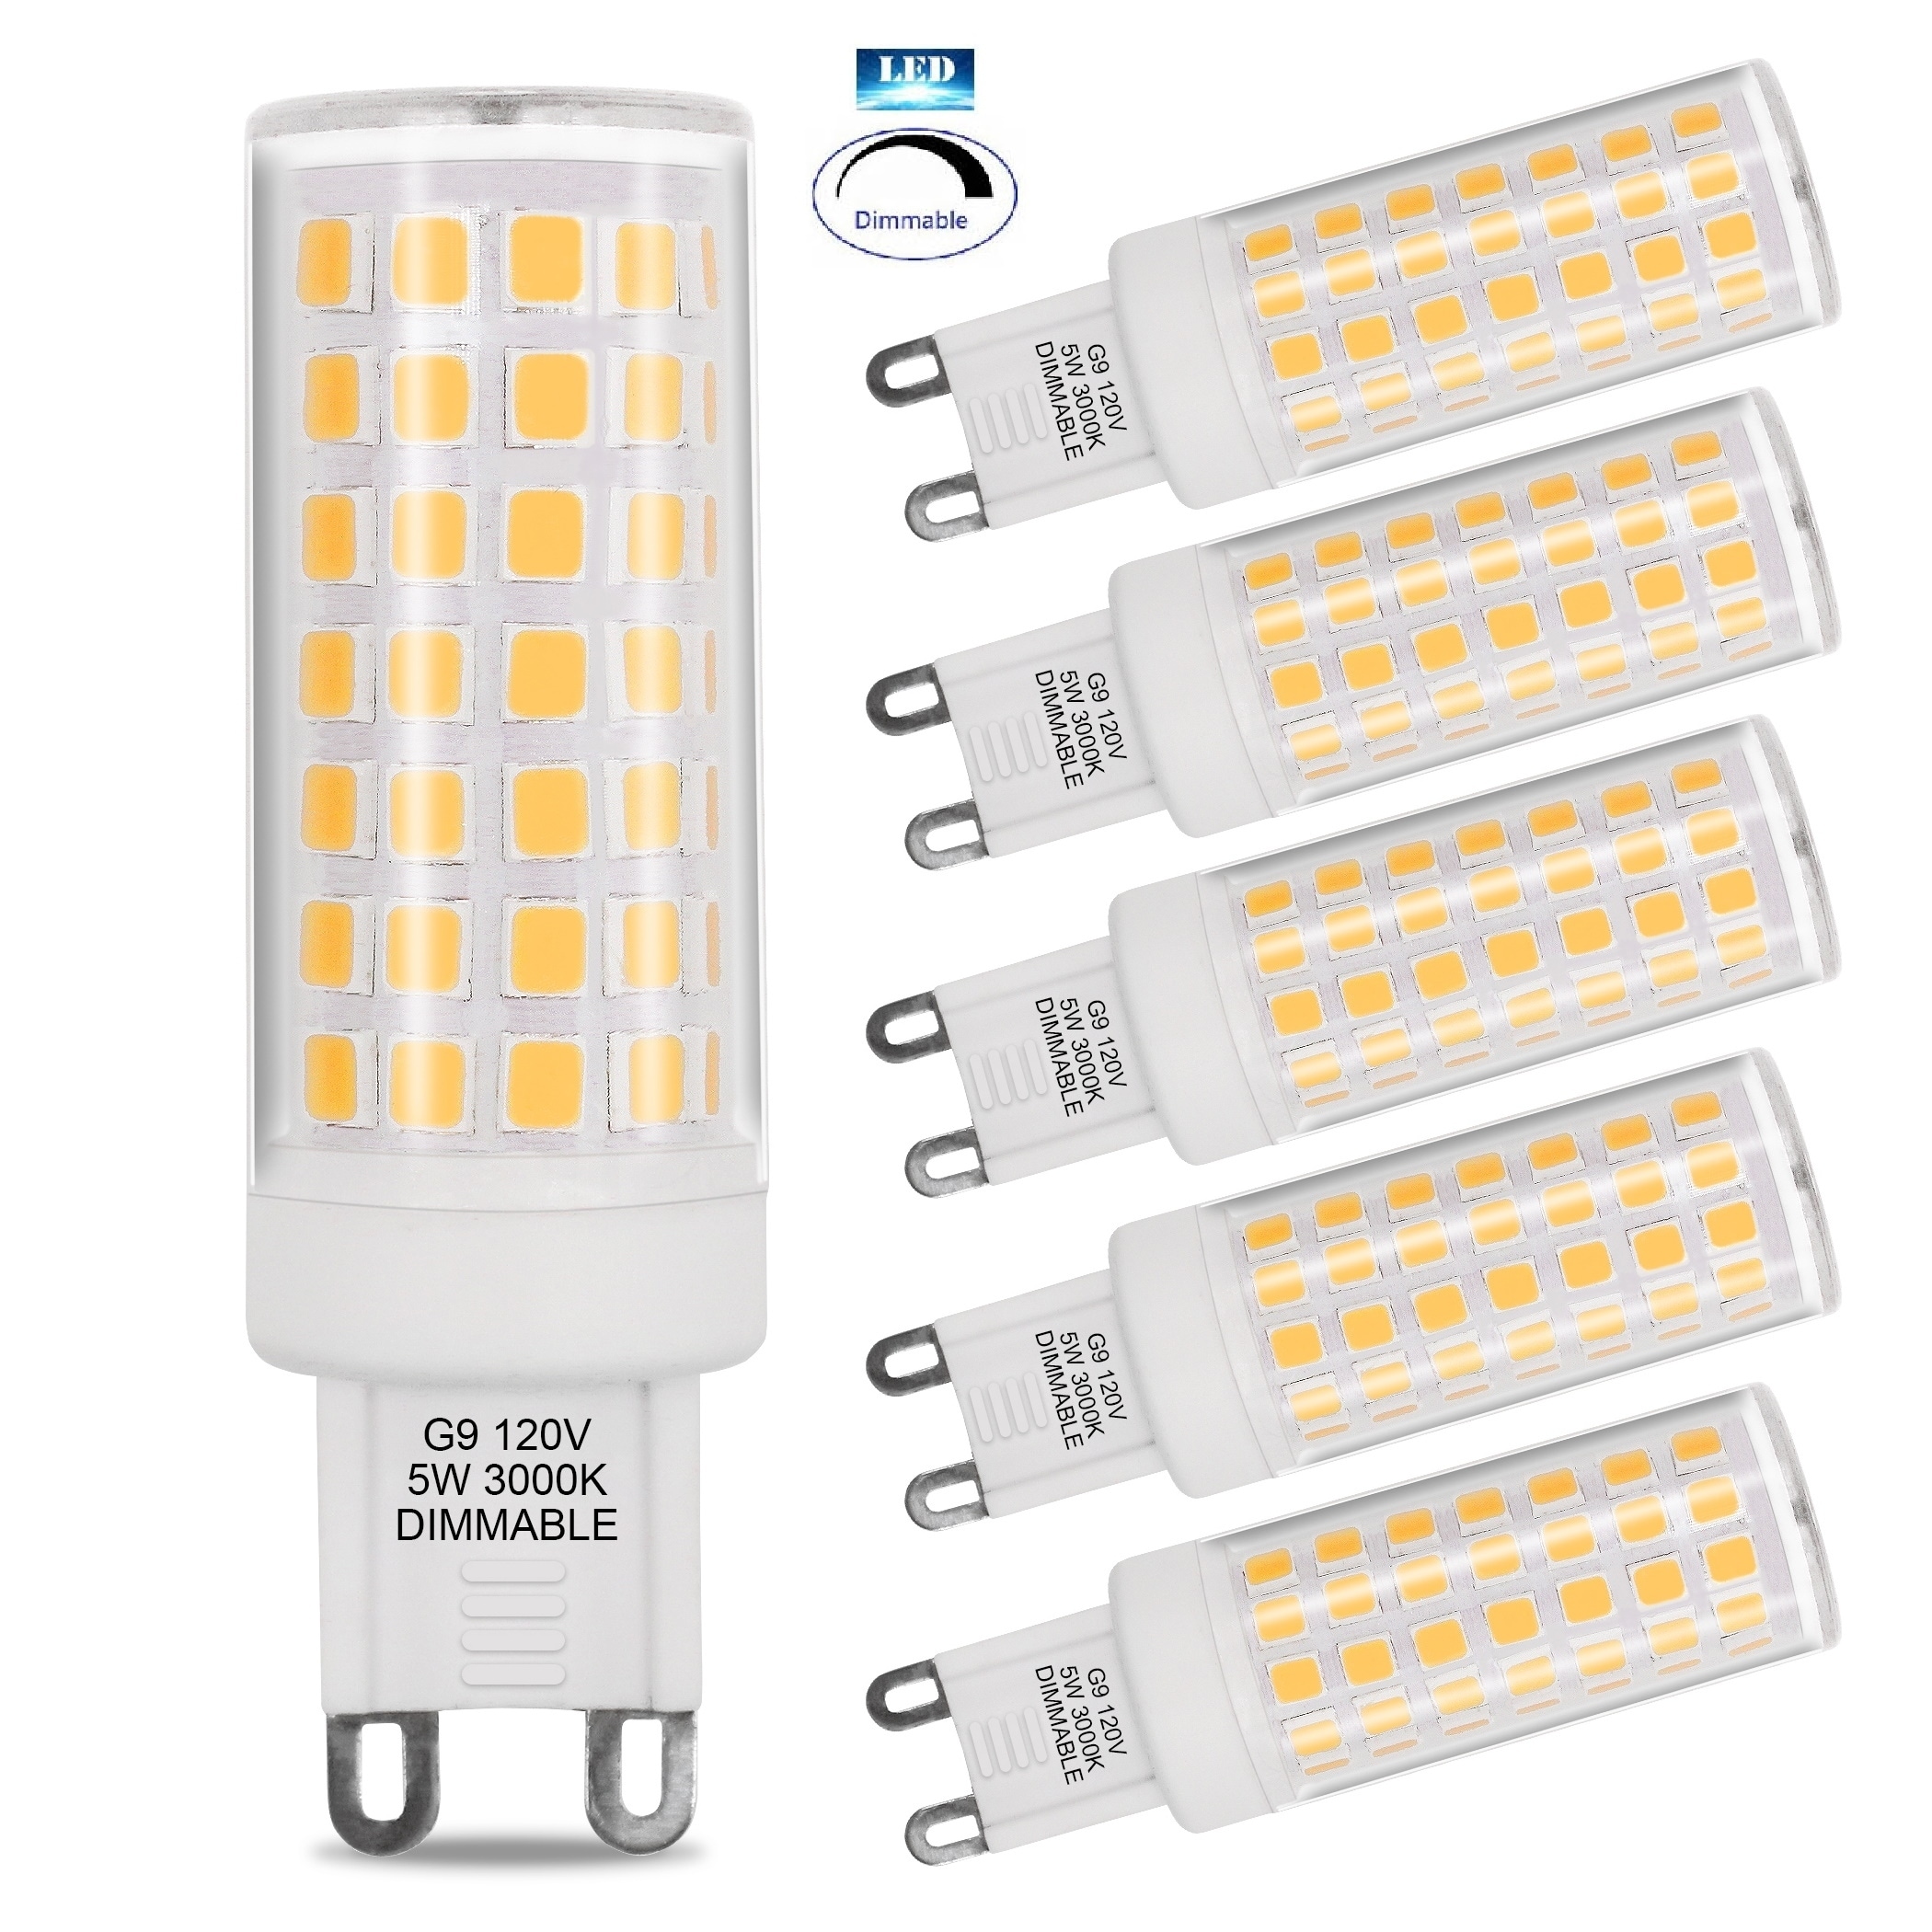 USA 5W G9 Dimmable LED light bulb (set of 6)) - White - On Sale - Bed Bath & Beyond - 24039857